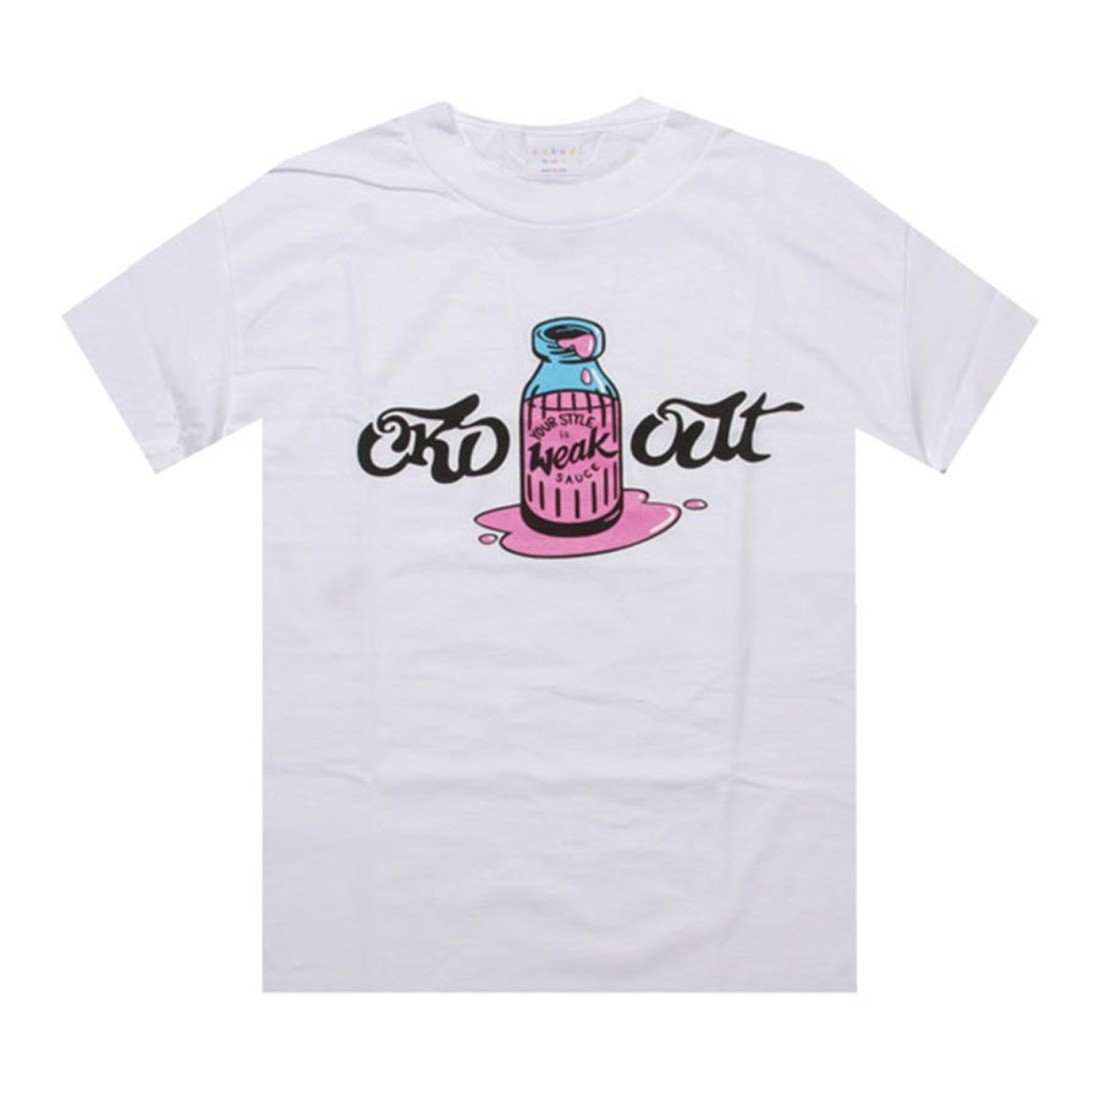 Caked Out Weaksauce Tee (white)